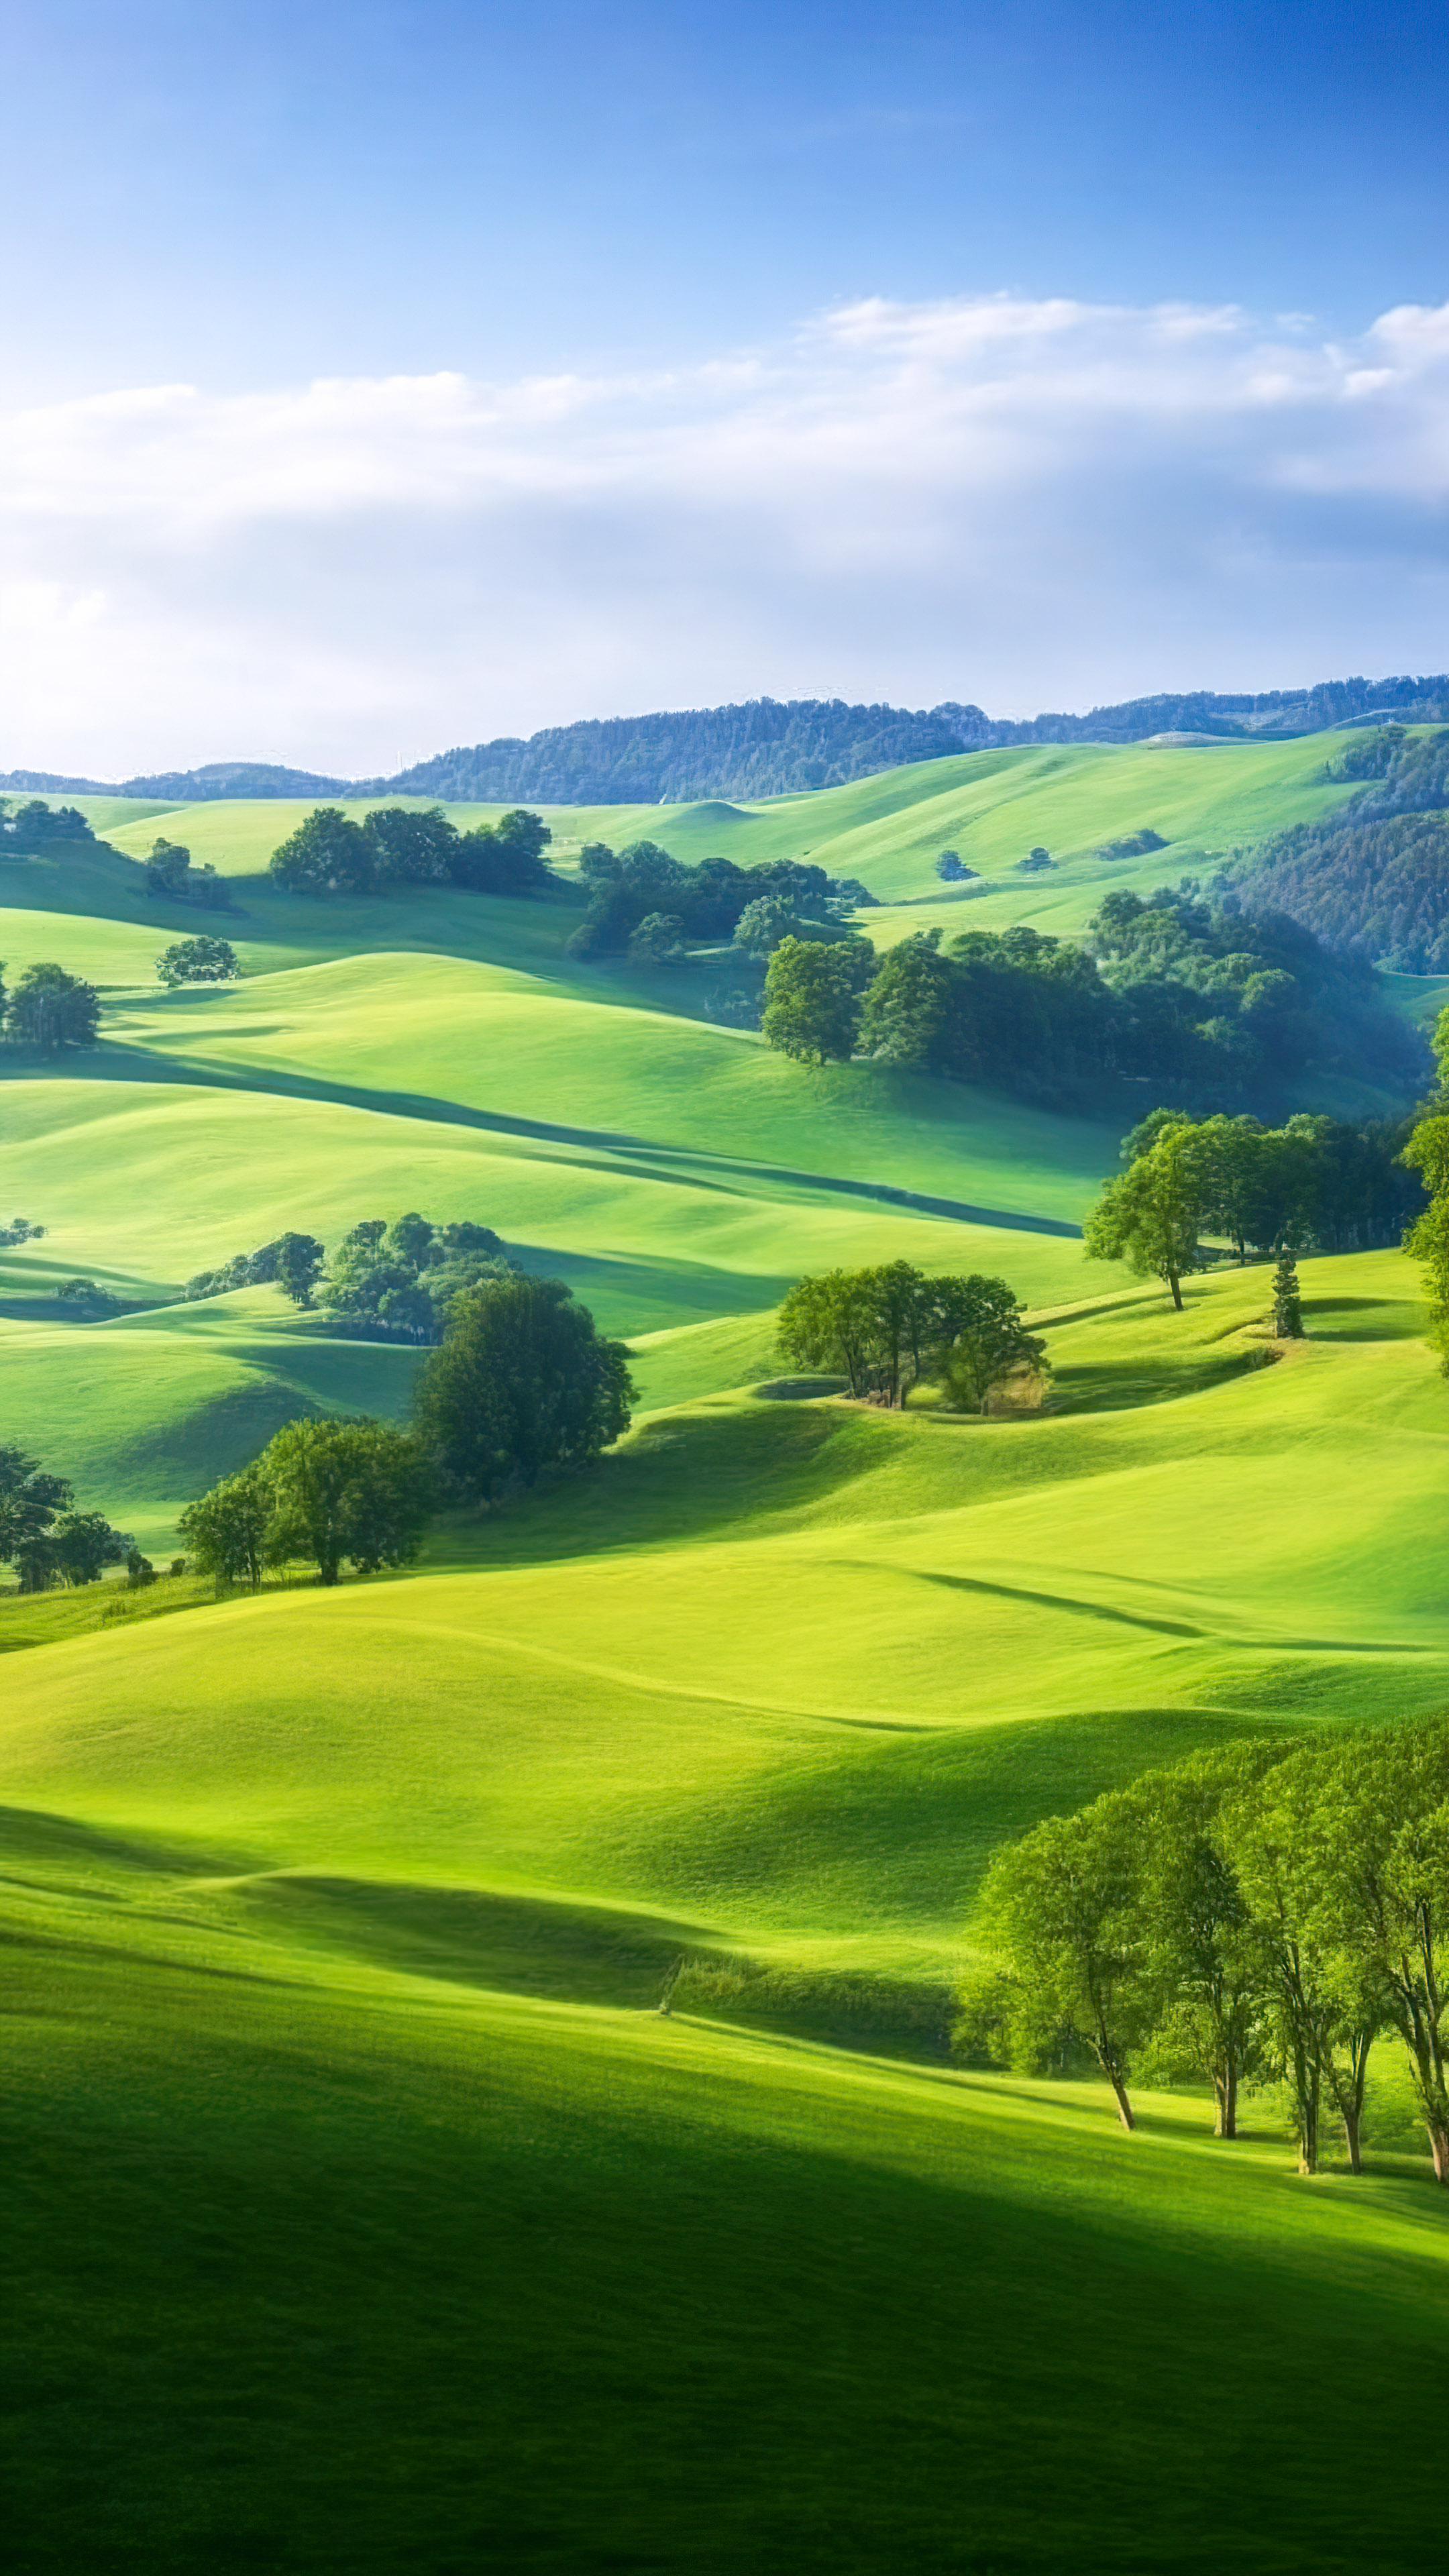 Relish the tranquility of our HD landscape wallpaper, showcasing a peaceful countryside scene with rolling hills, green pastures, and a clear day’s sky.